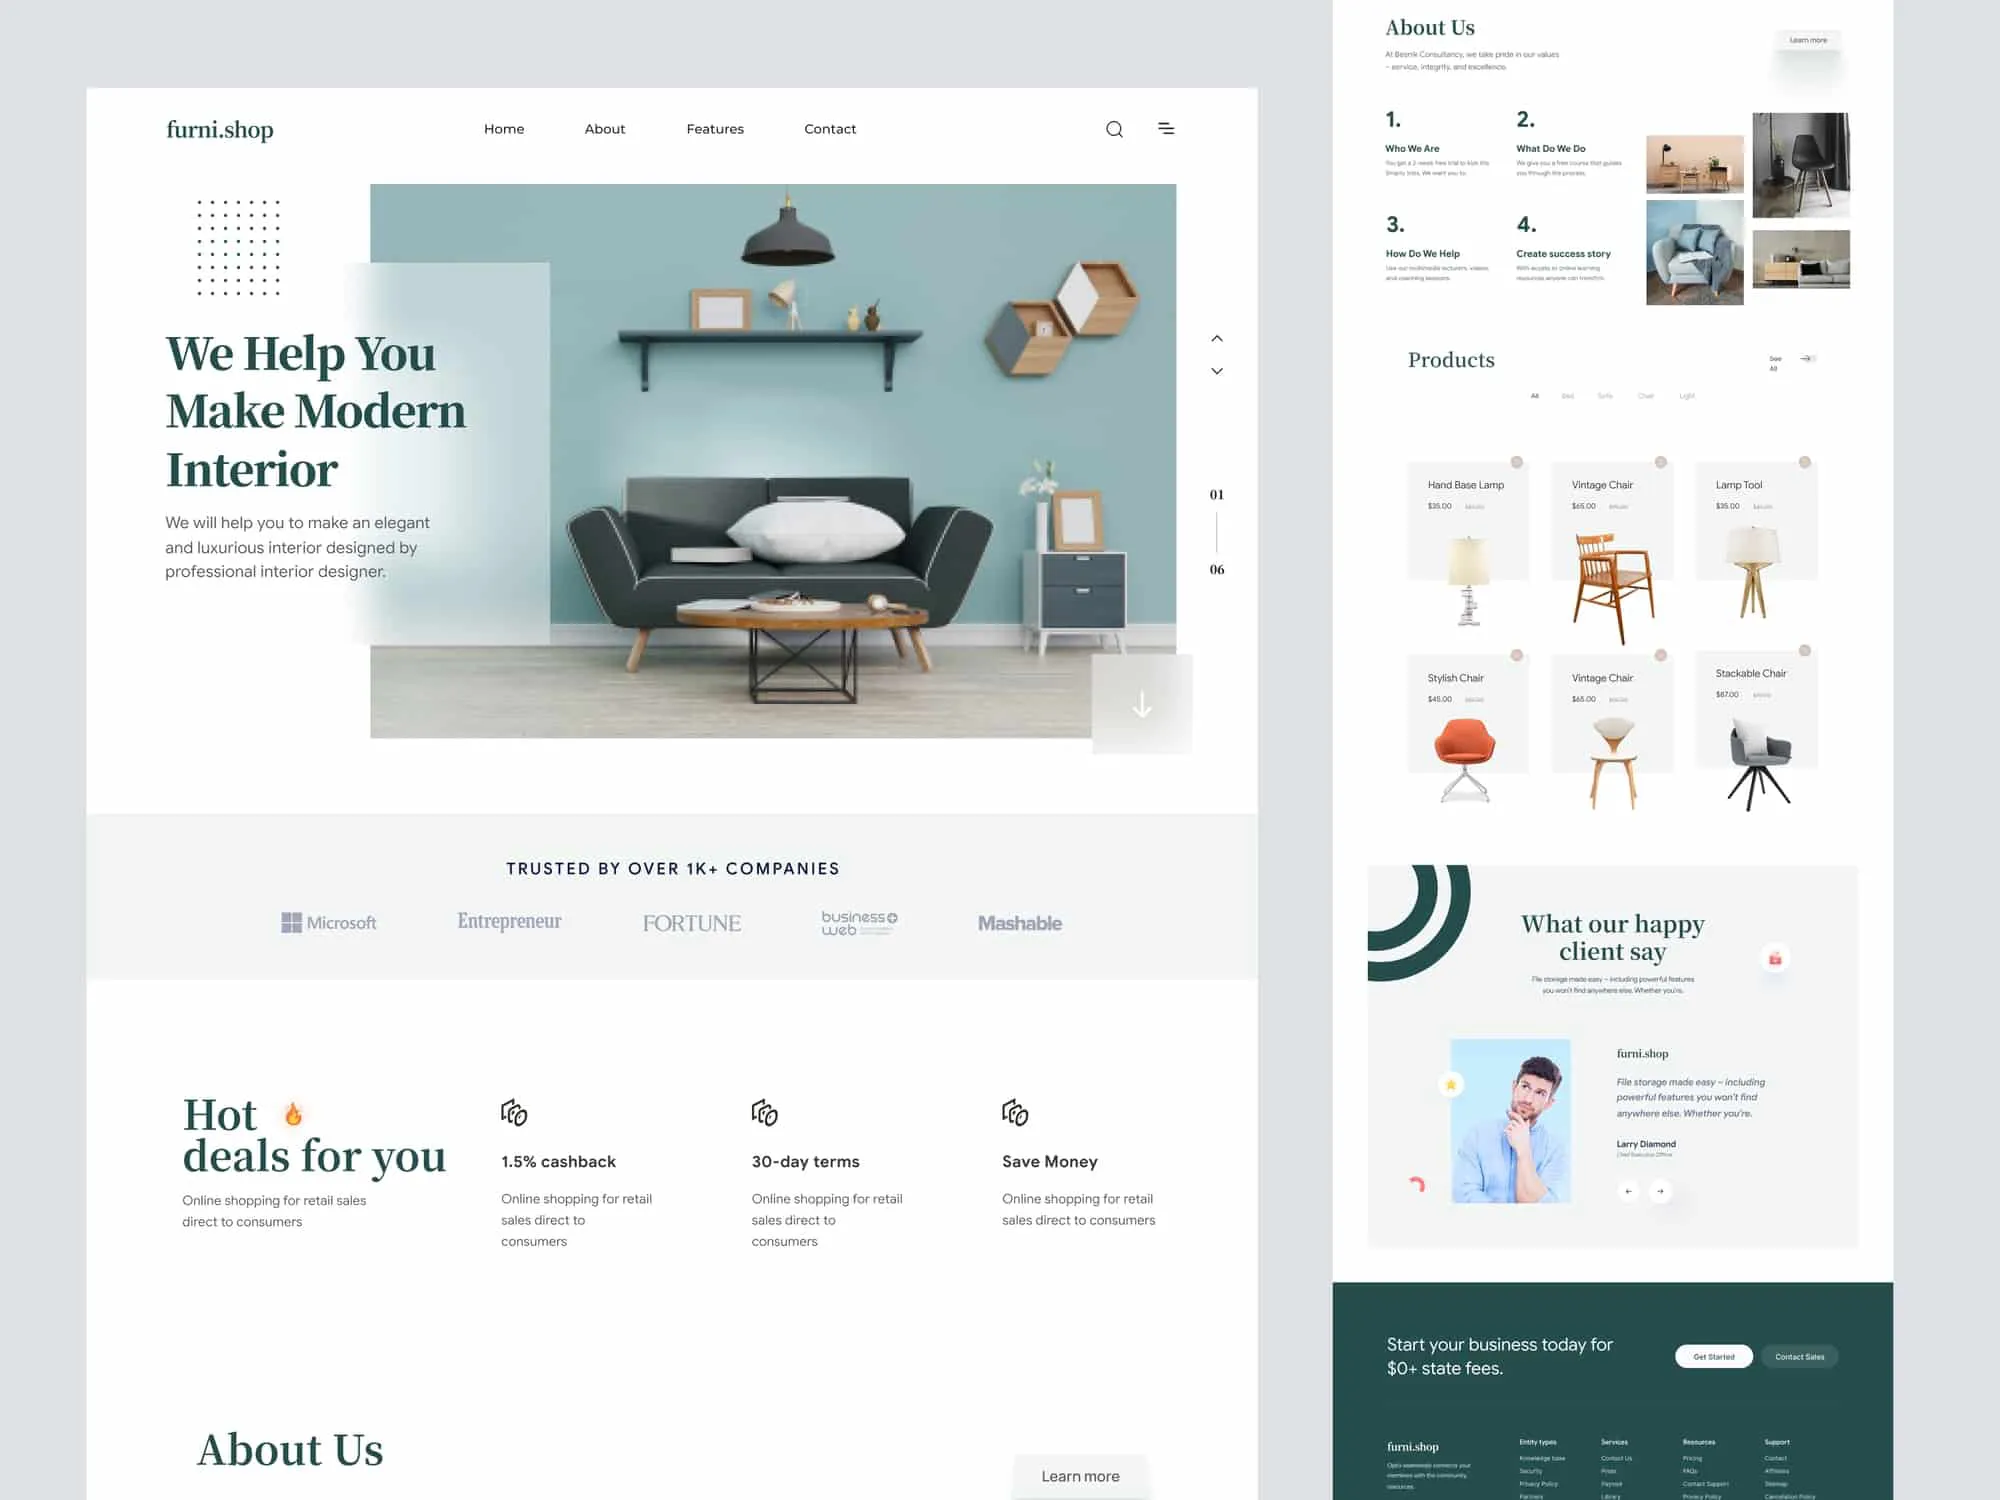 Ecommerce/Shopify Website Landing Page Design For Furniture Company for Figma and Adobe XD No 1